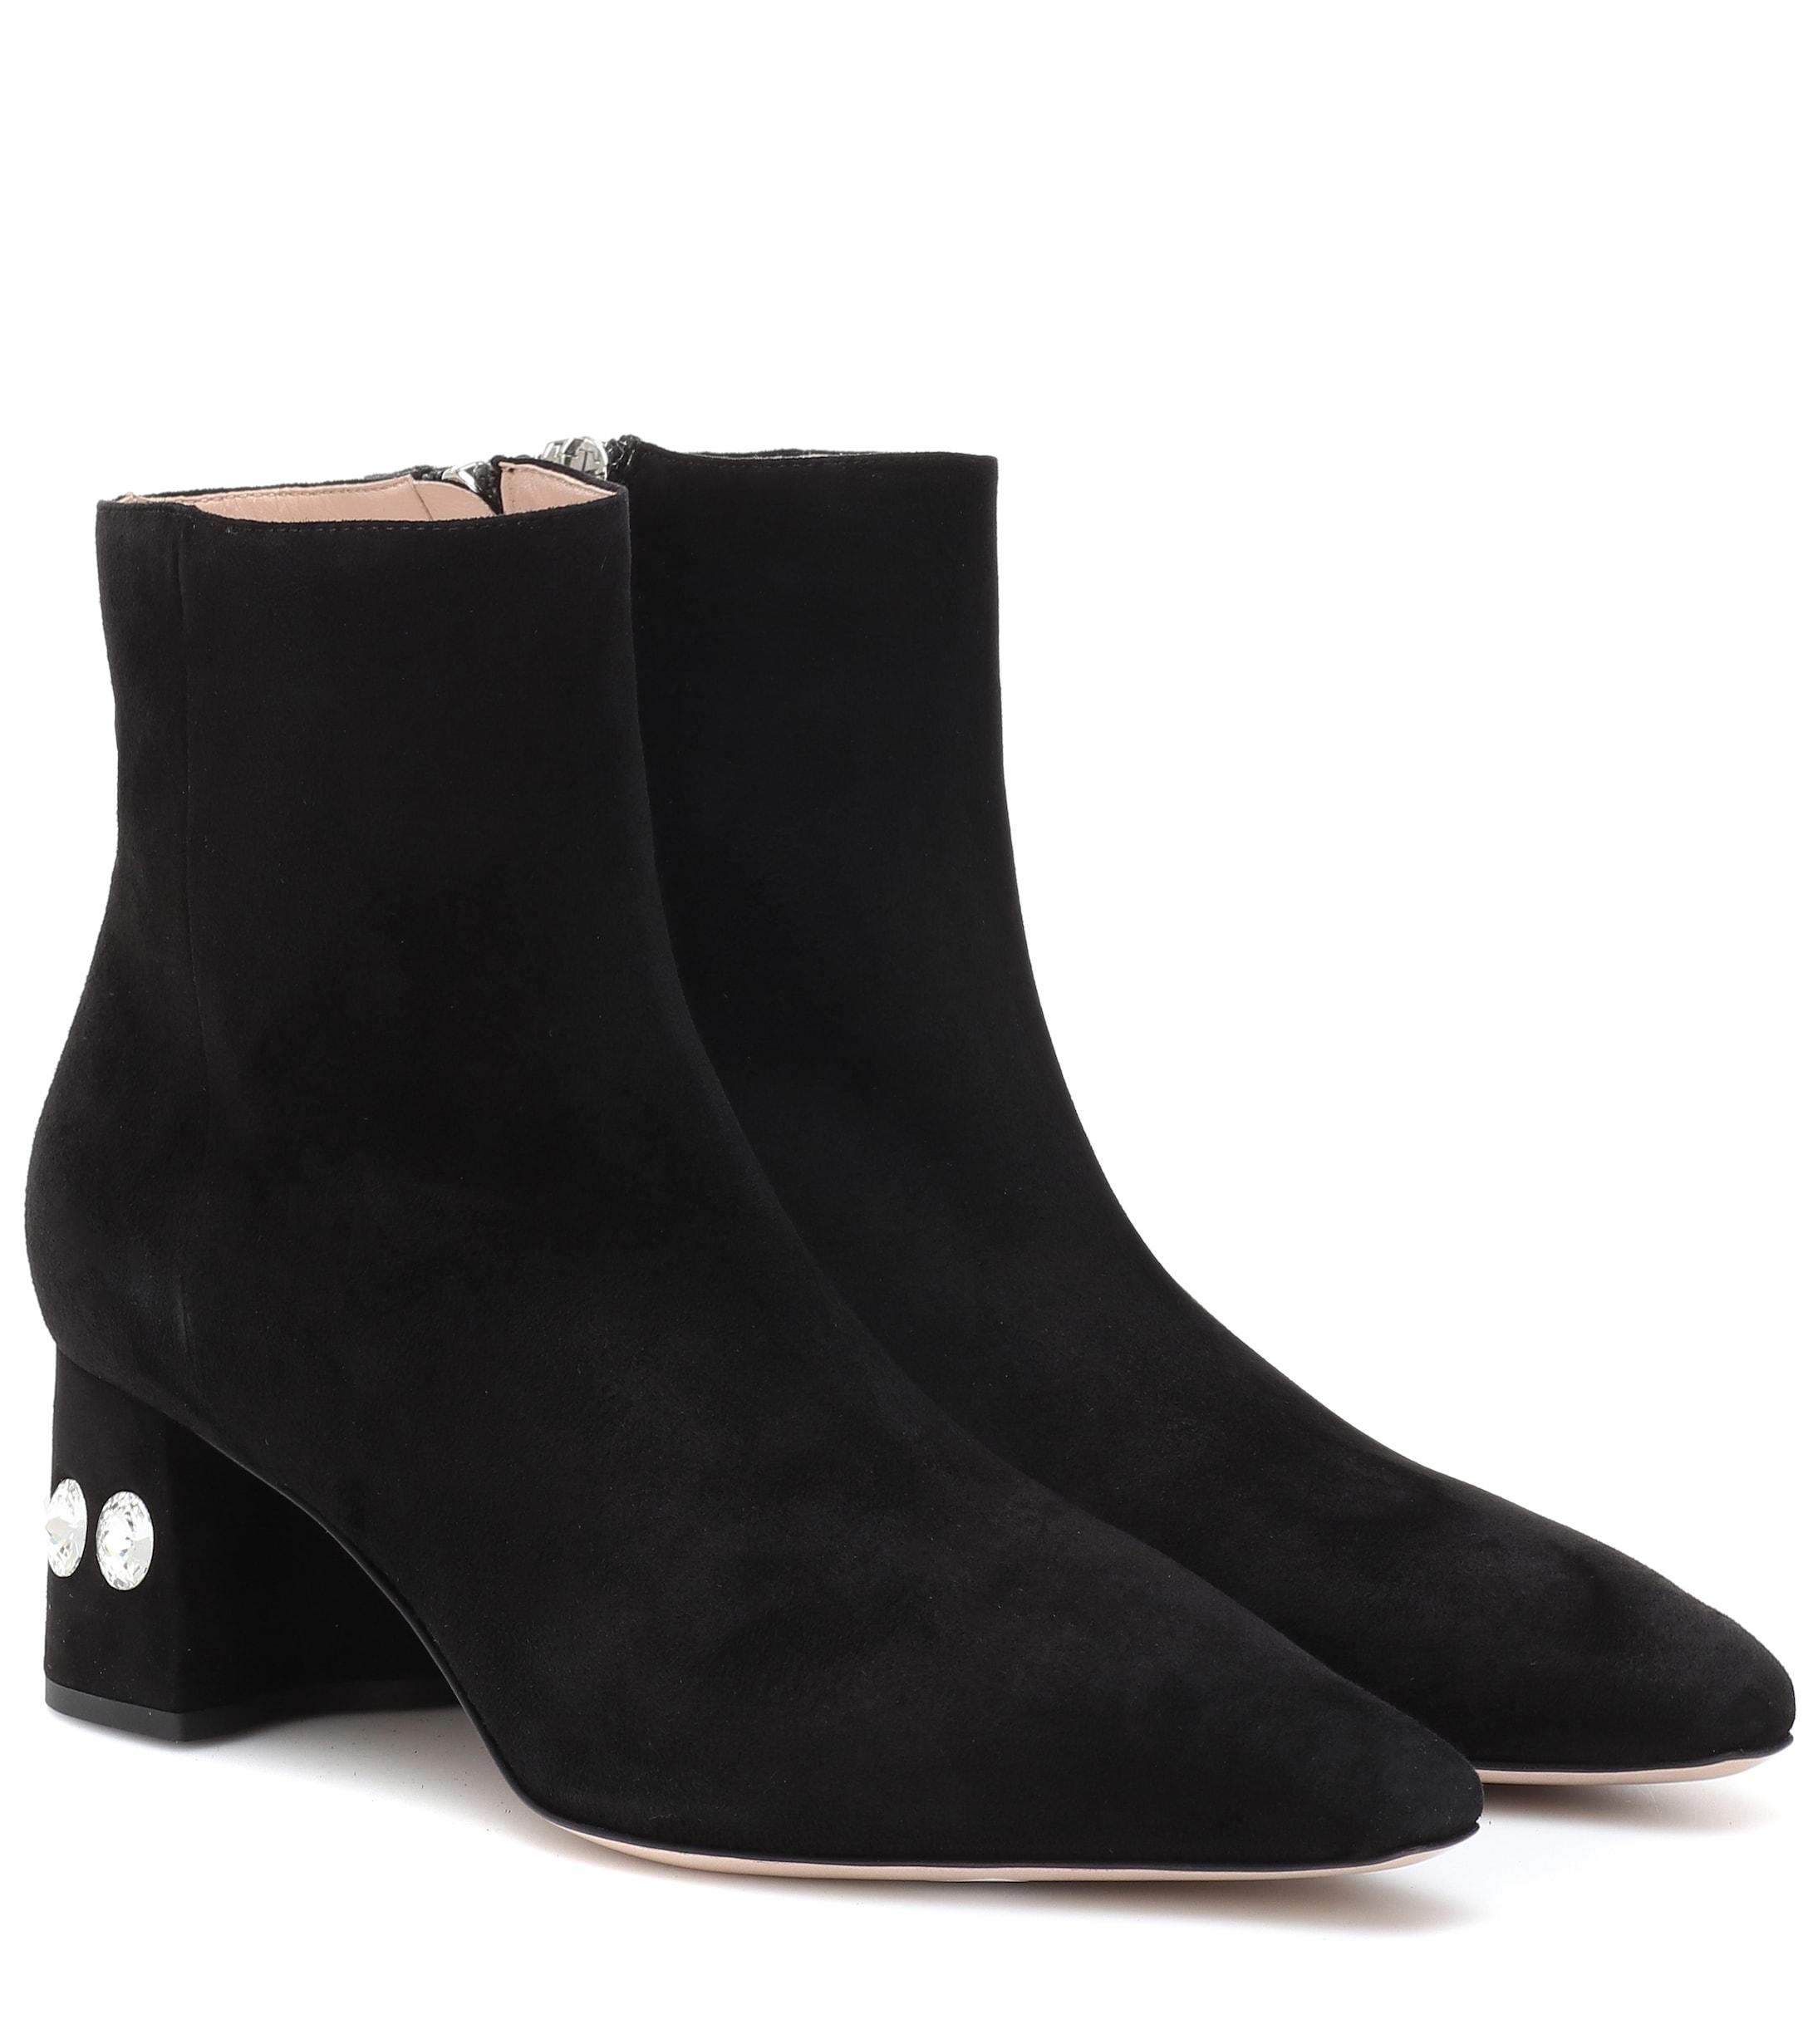 Miu Miu Embellished Suede Ankle Boots in Black - Lyst